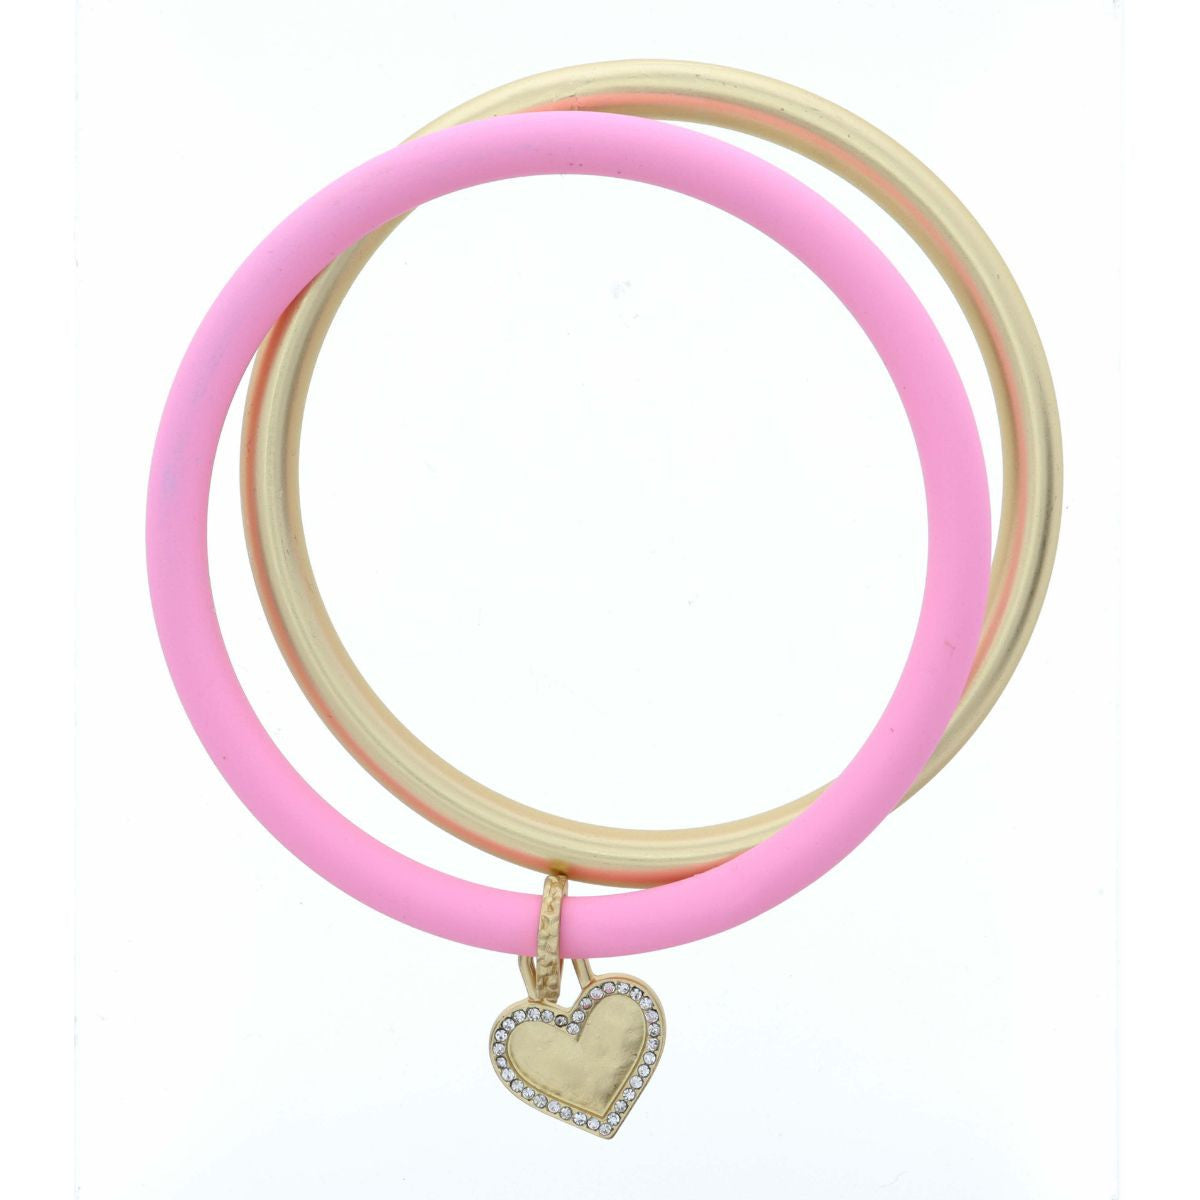 Stack of 2 Pink & Gold Heart Bangle